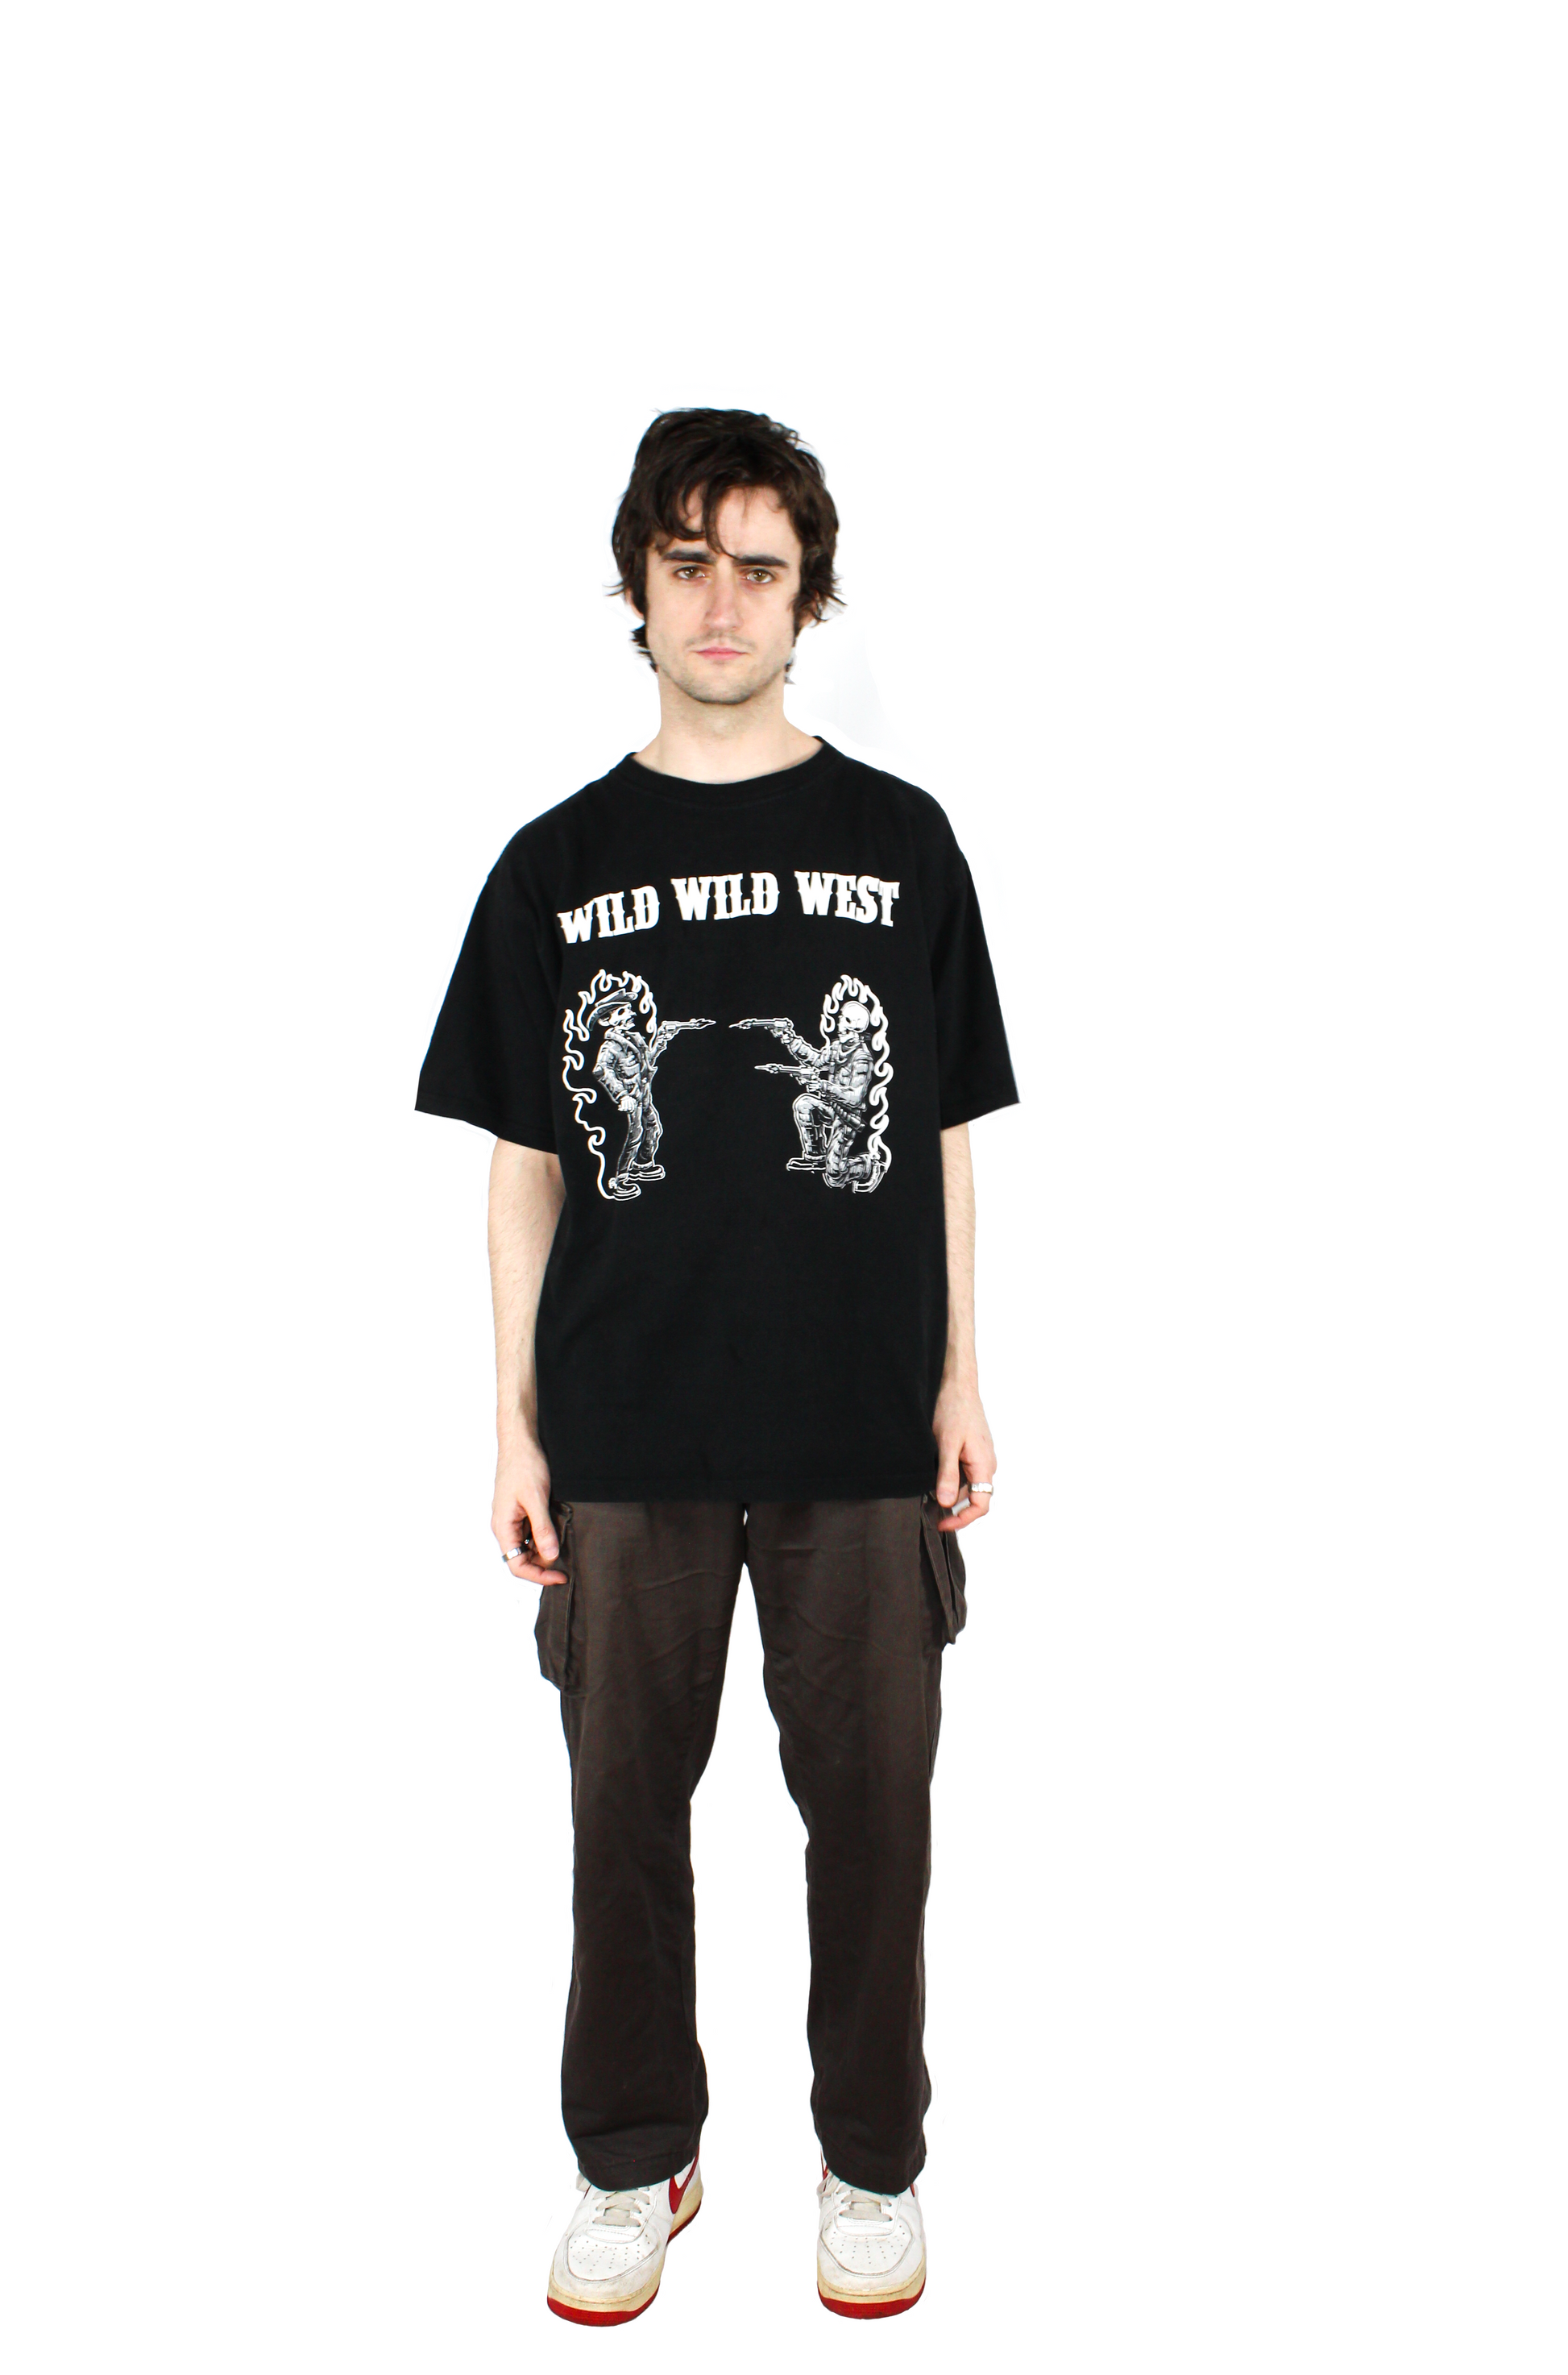 Model wearing heavyweight oversized baggy black tshirt made from 100% cotton with wild west themed design with an old school cowboy shootout